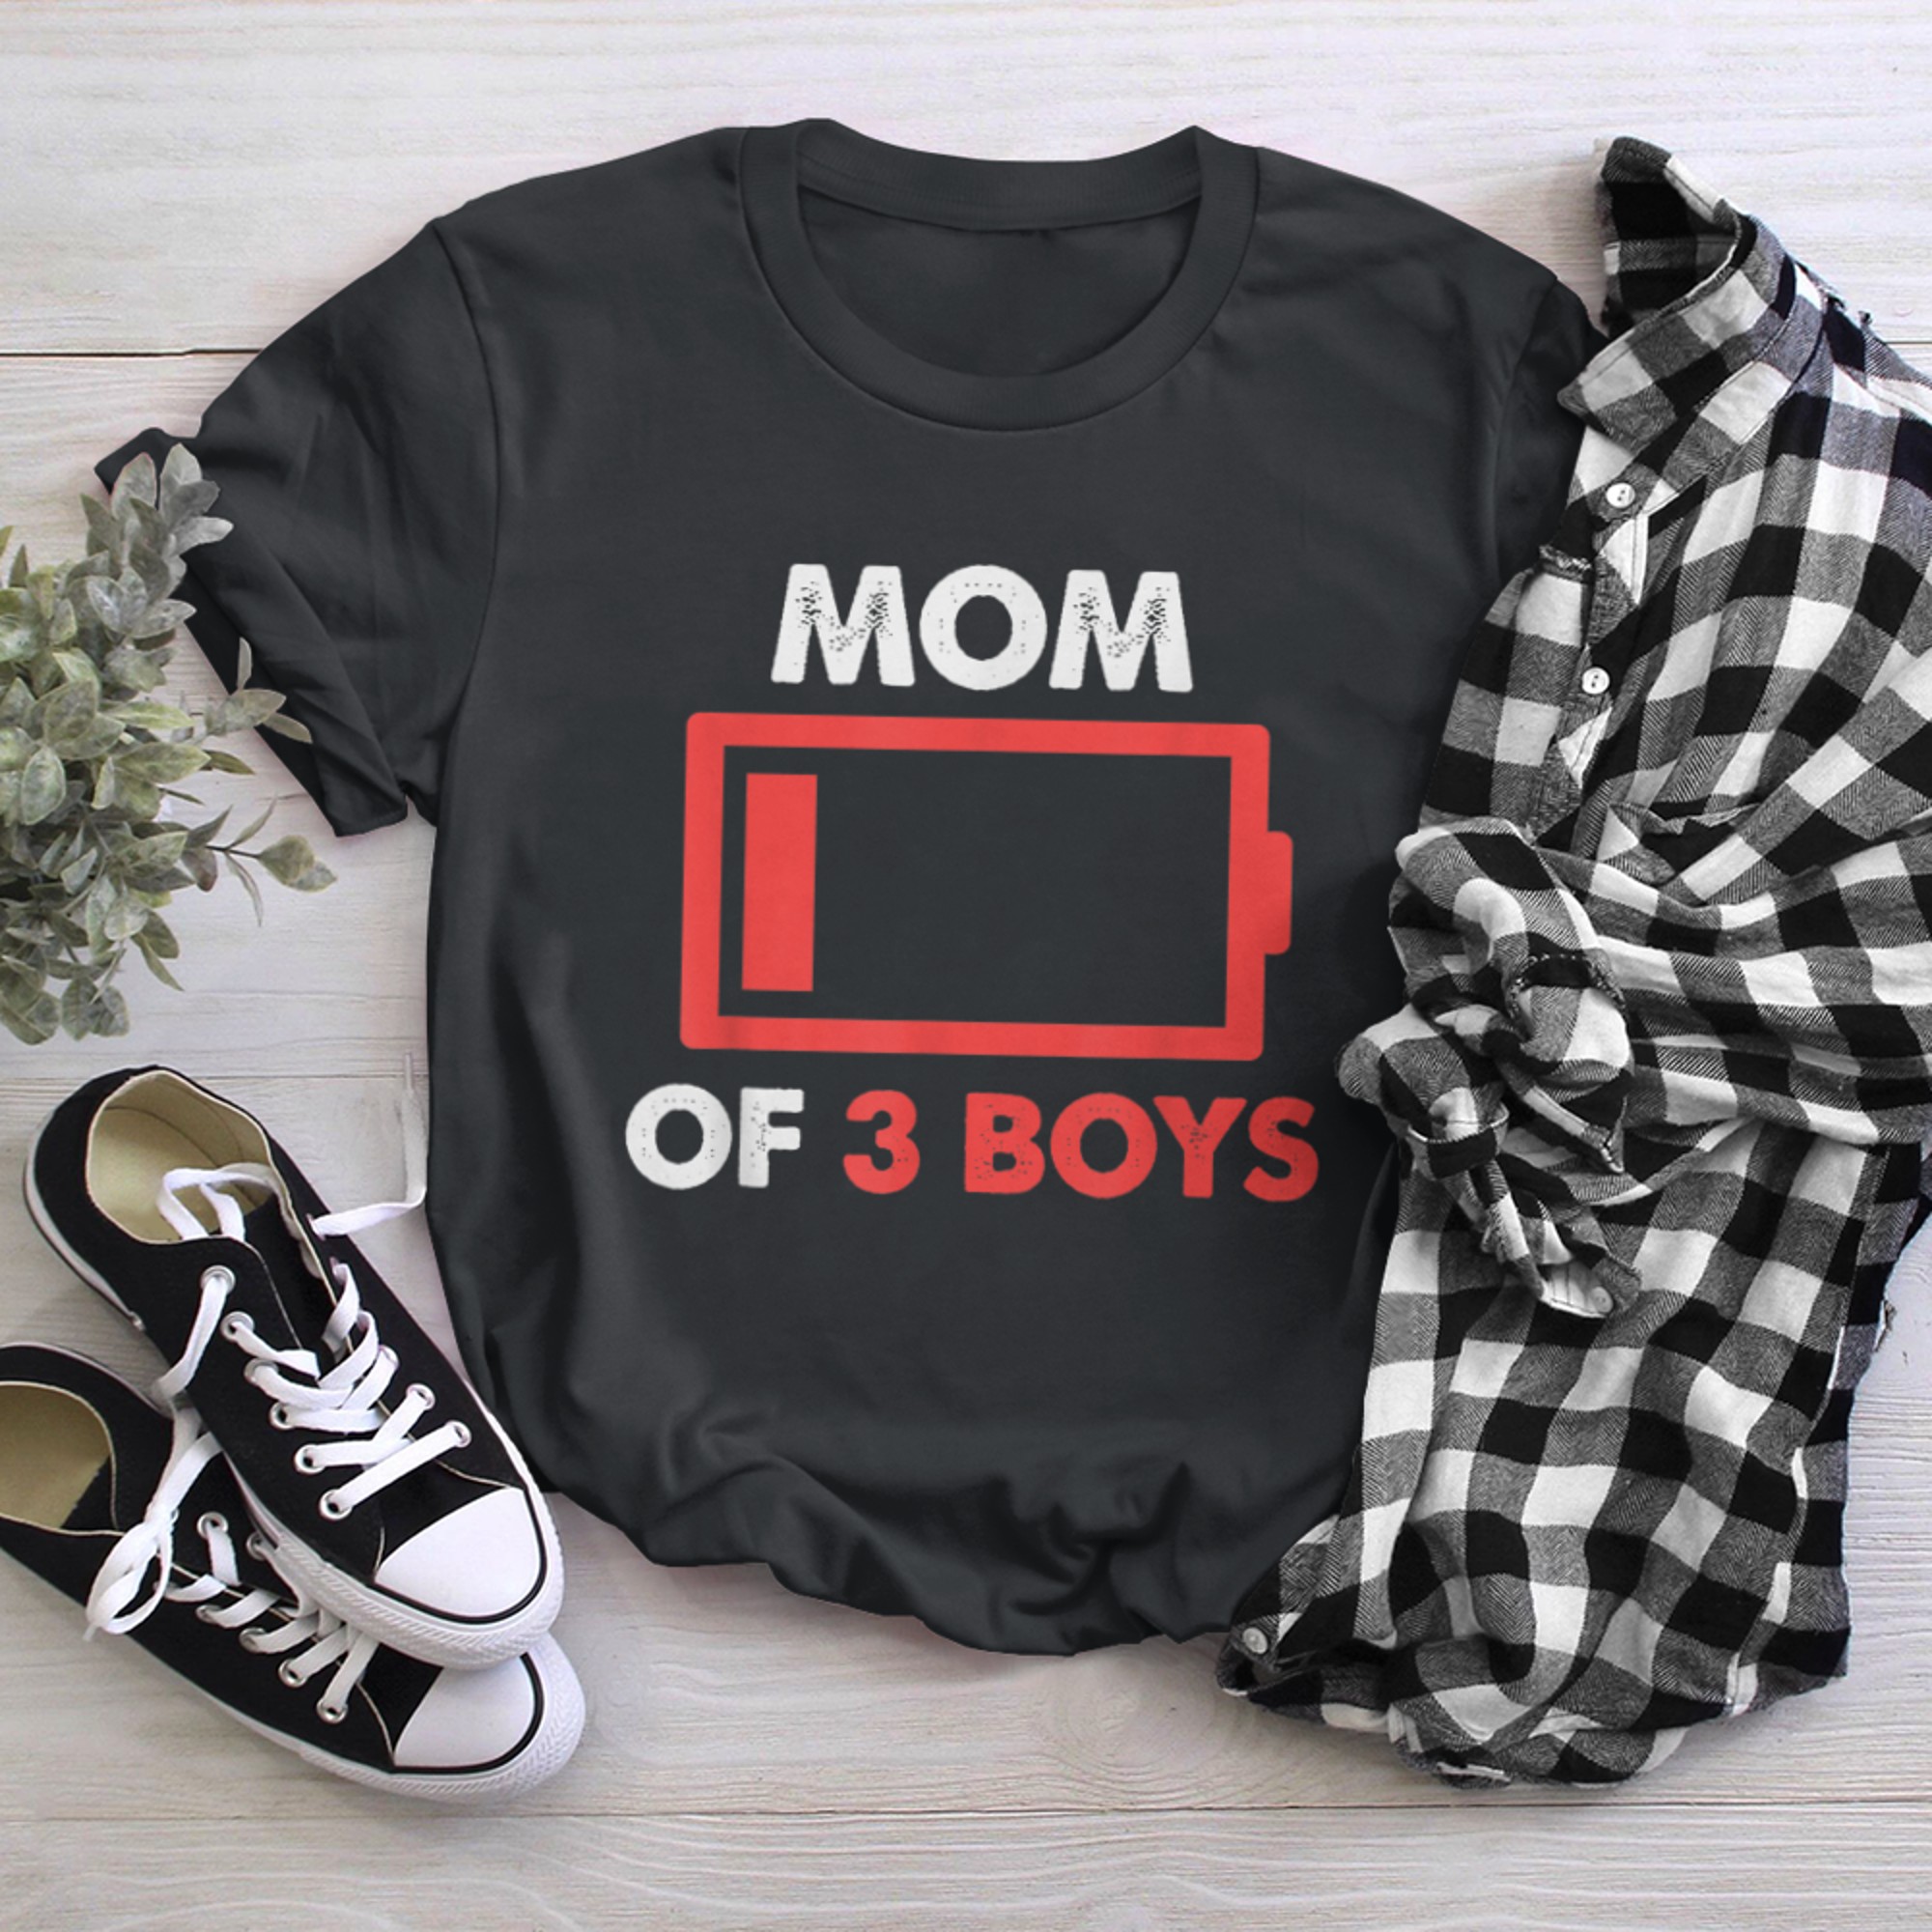 Mom of From Son Mothers Day Birthday Low Battery t-shirt black